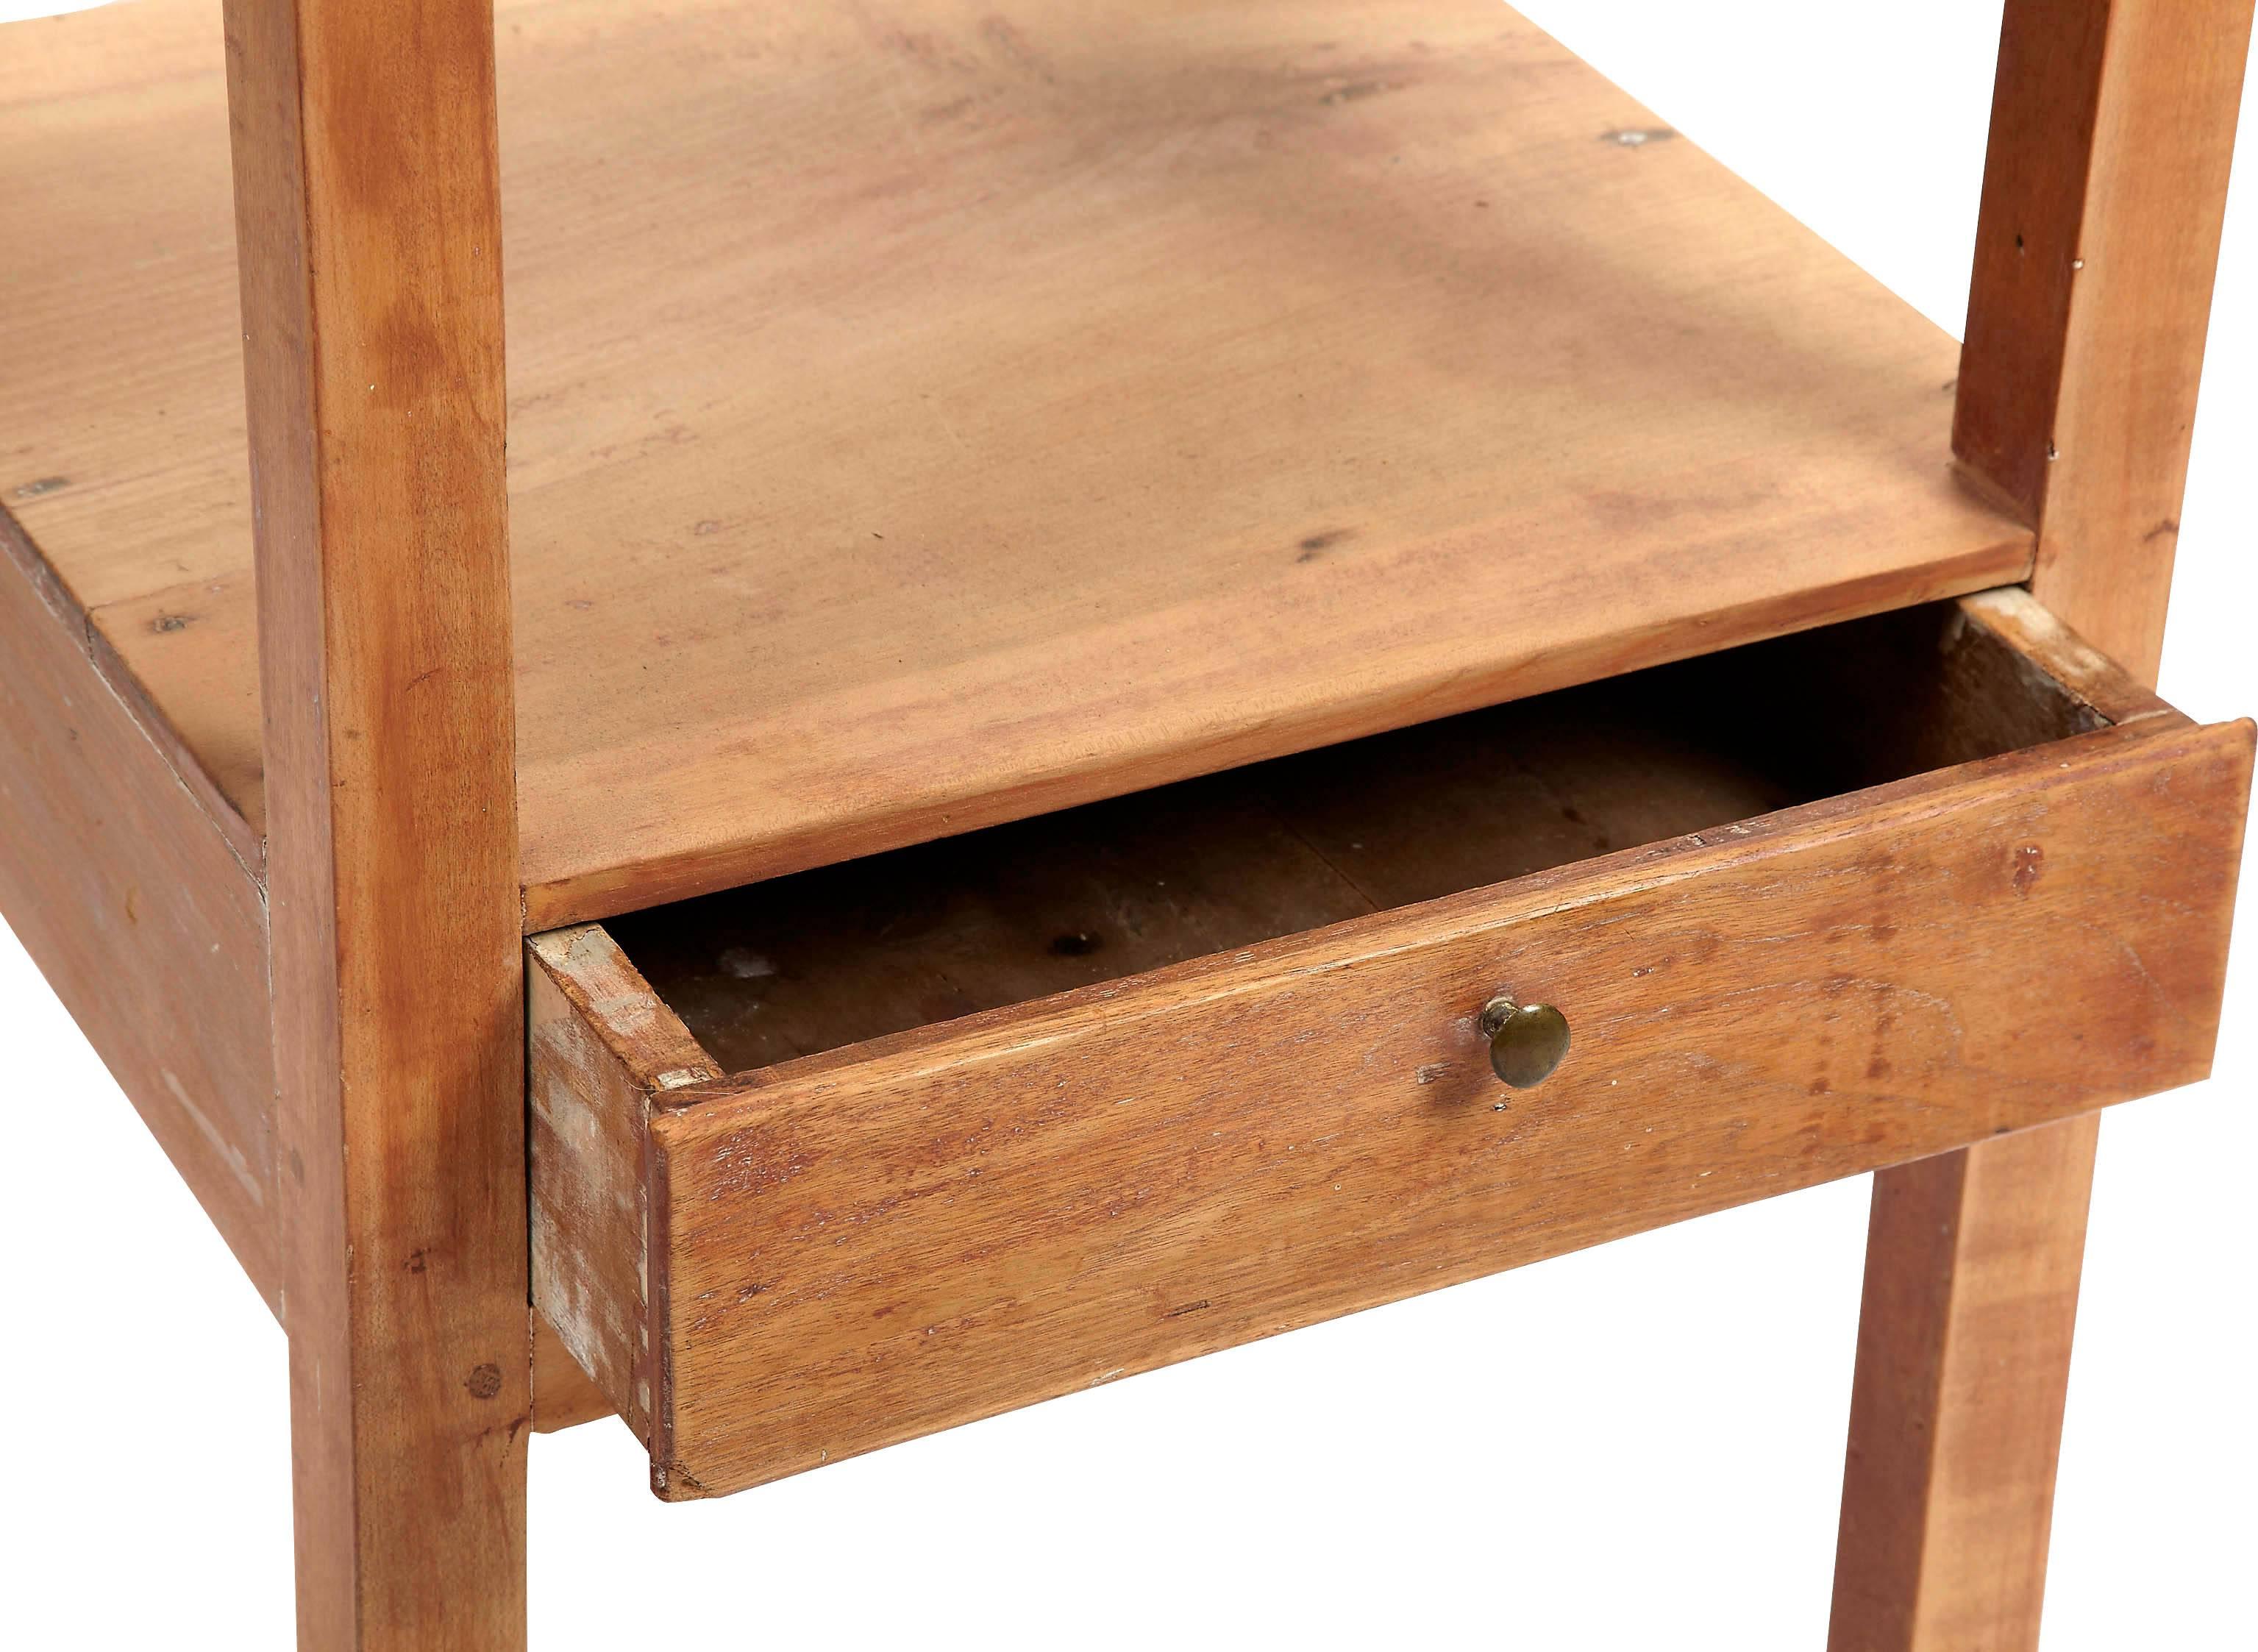 This night table or stand has a 3 sided tray like surround top and a single dovetailed drawer with a metal knob and shelf for storage and a place to put books or other items.
 